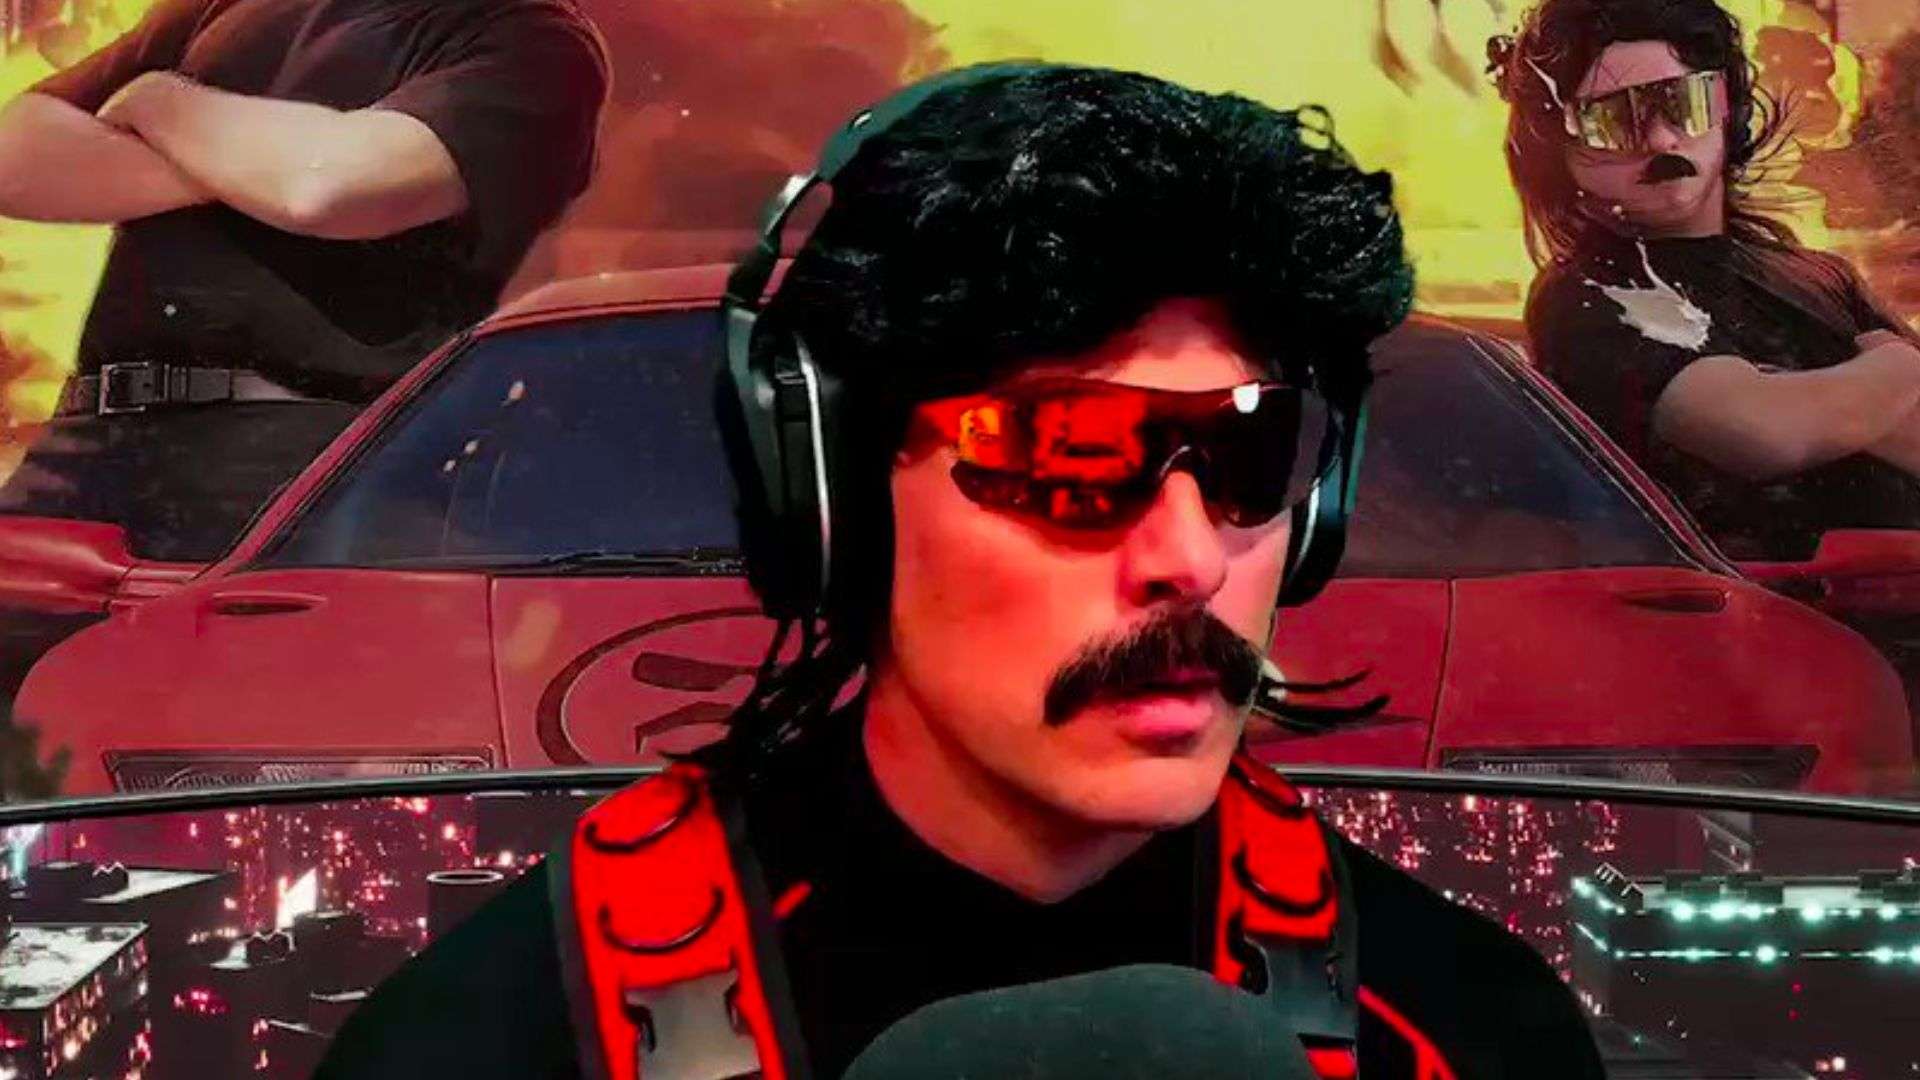 Dr Disrespect lookingdown at screen next to him in red car